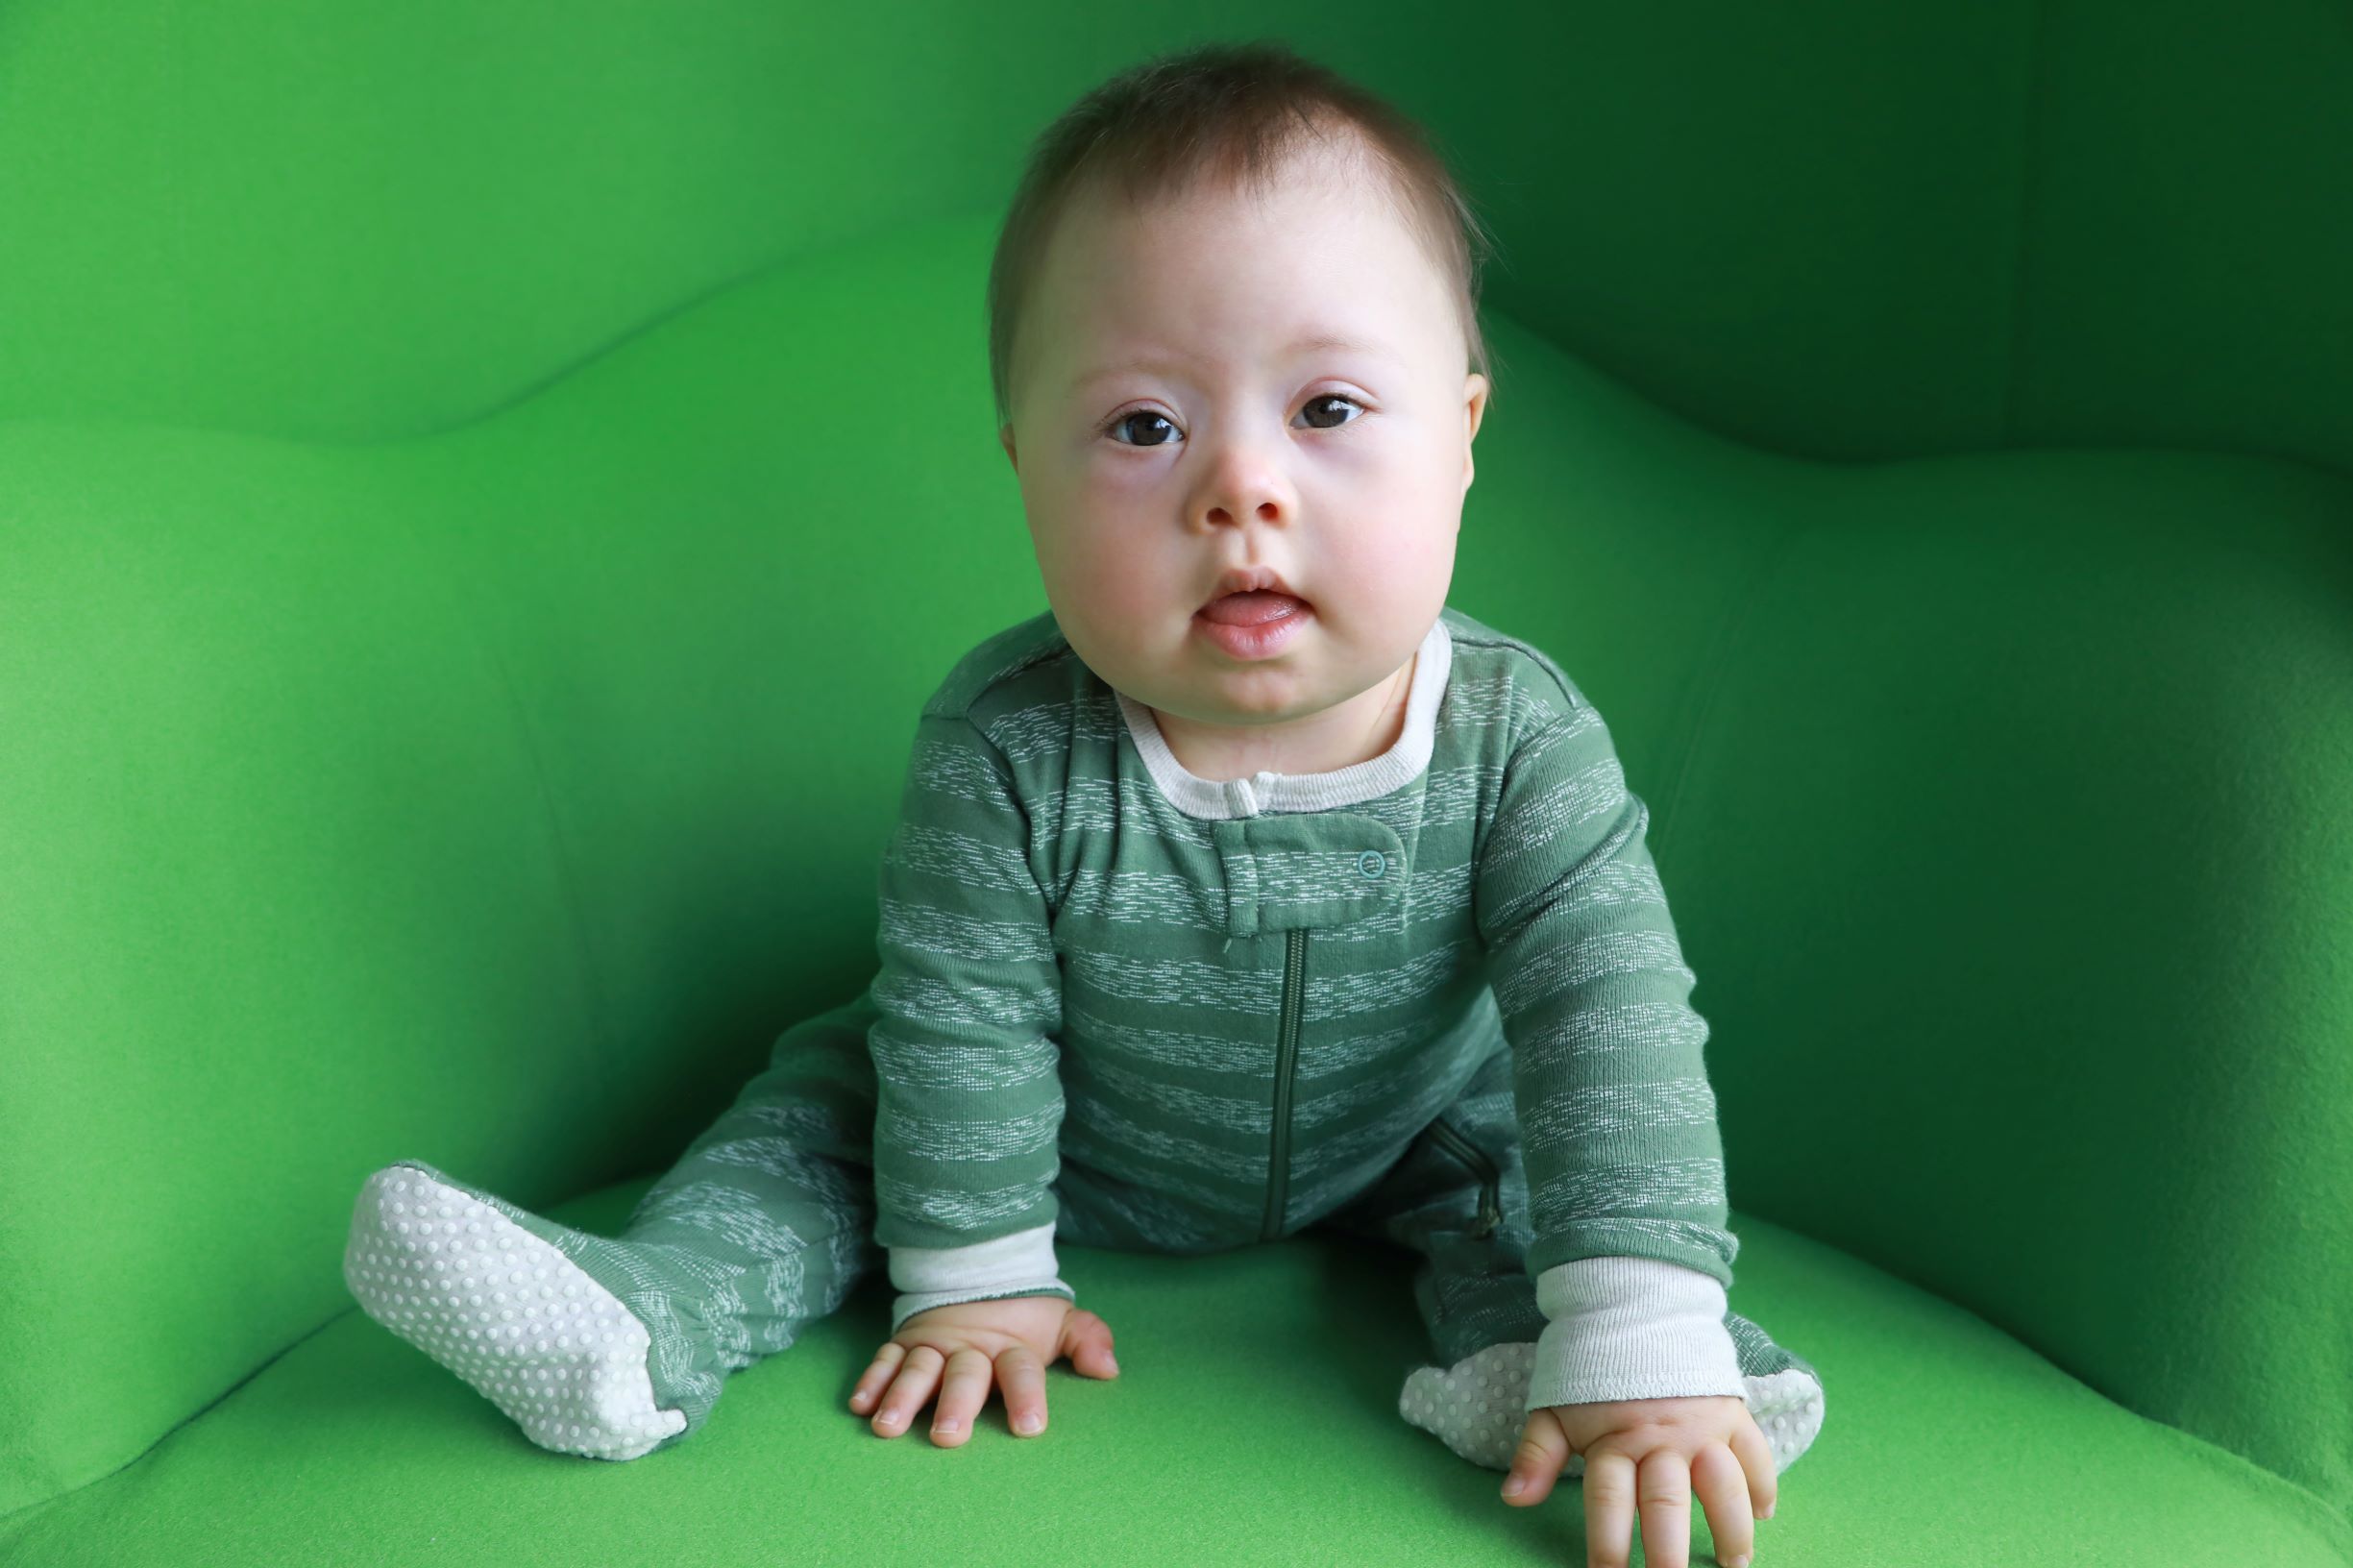 A baby with Down syndrome wearing green-striped footie pajamas sits splayed forward in a bright green chair.